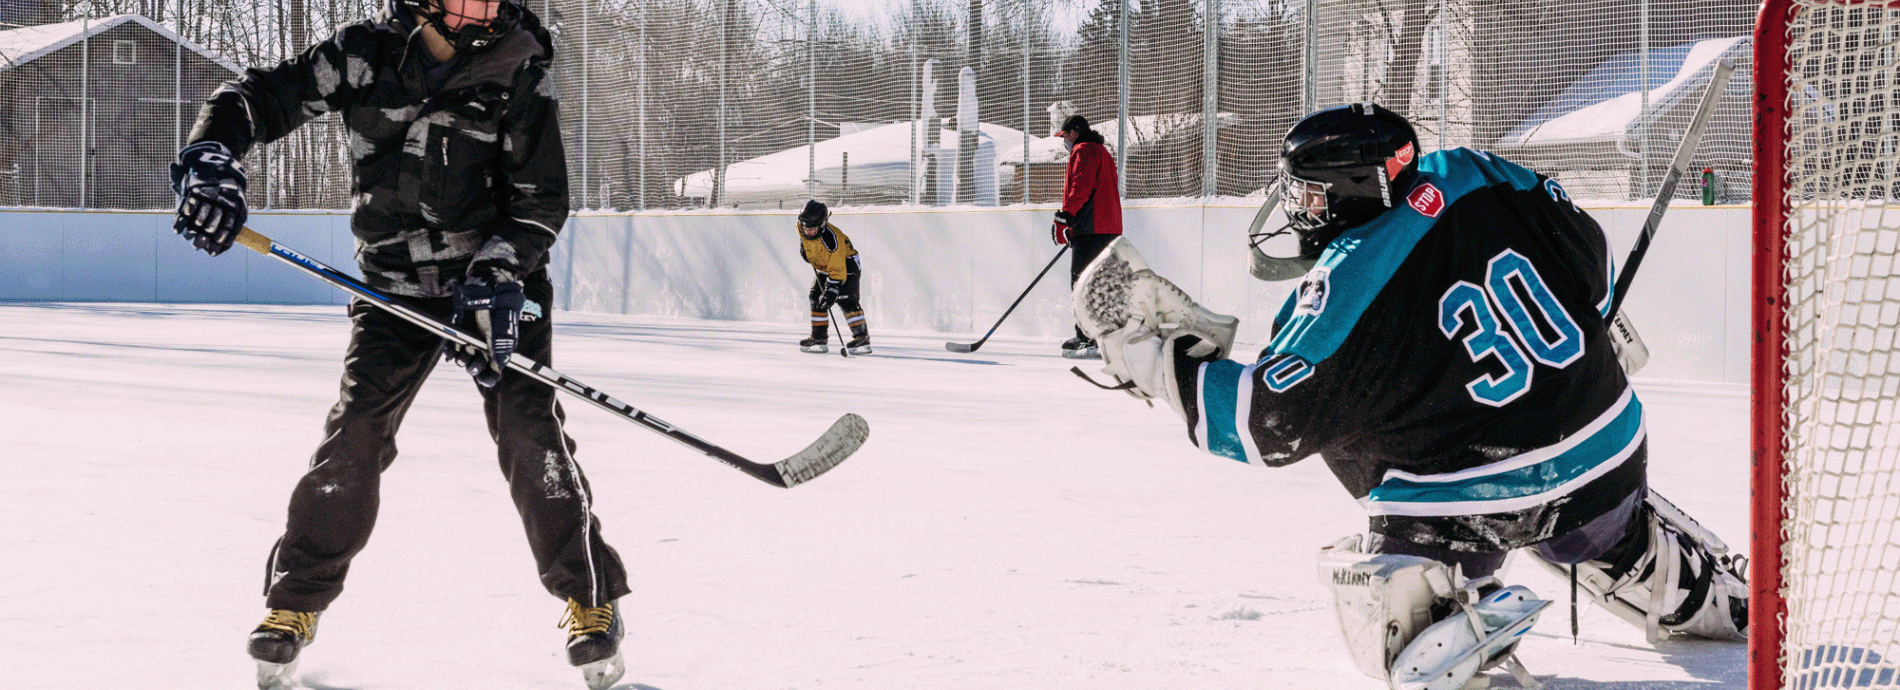 group playing hockey on an outdoor ice rink